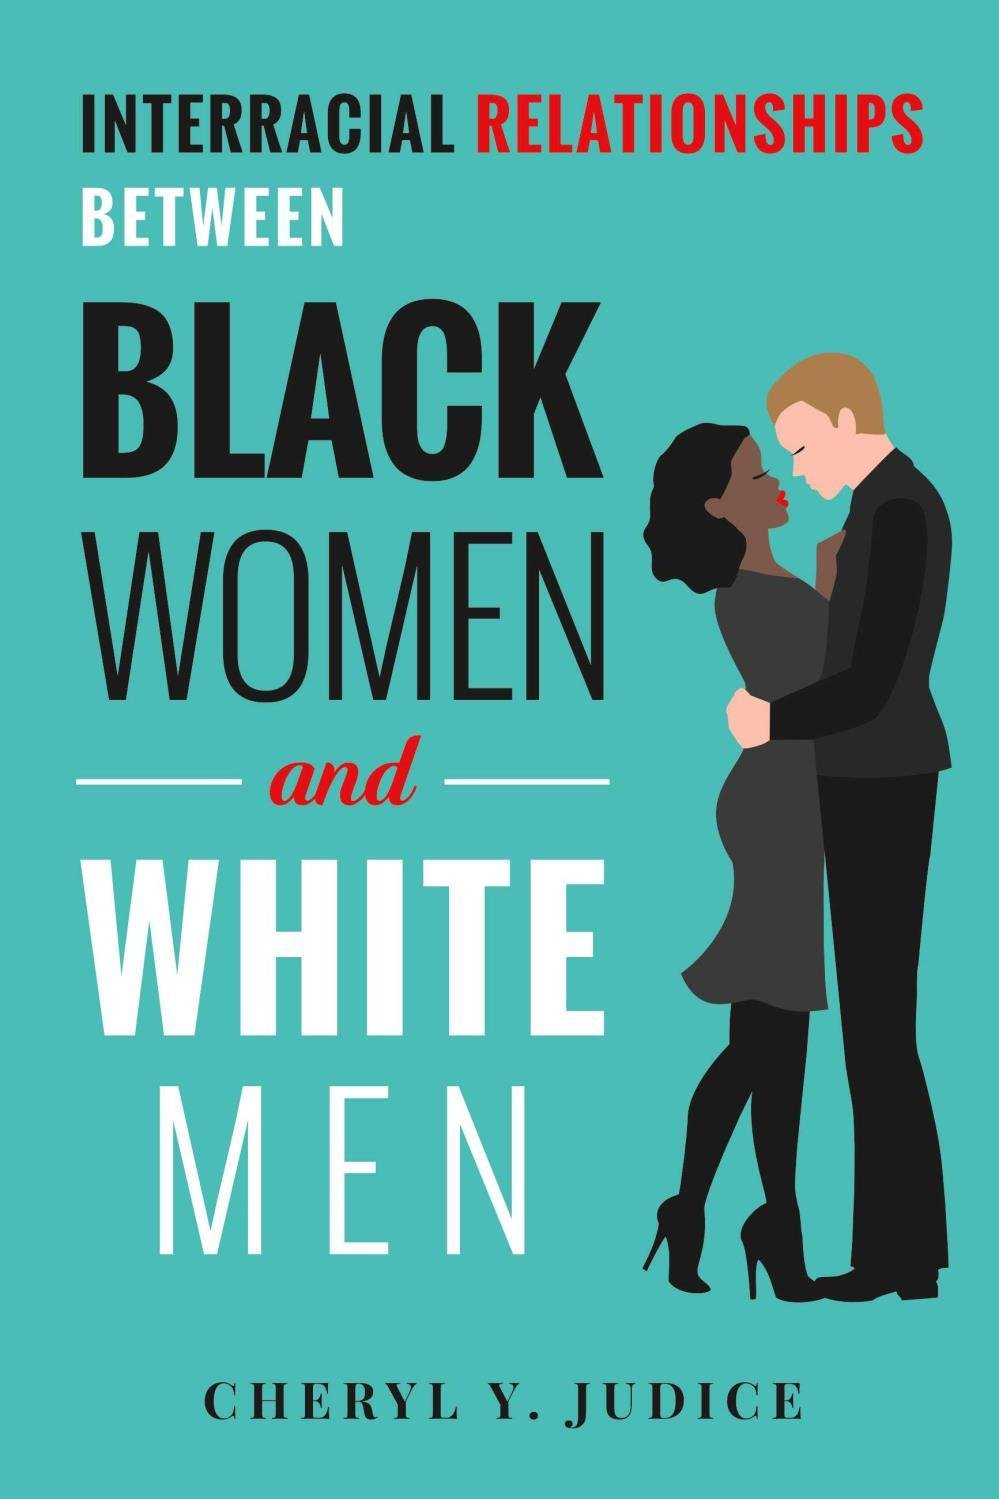 Women black eastern men middle and 9 Things